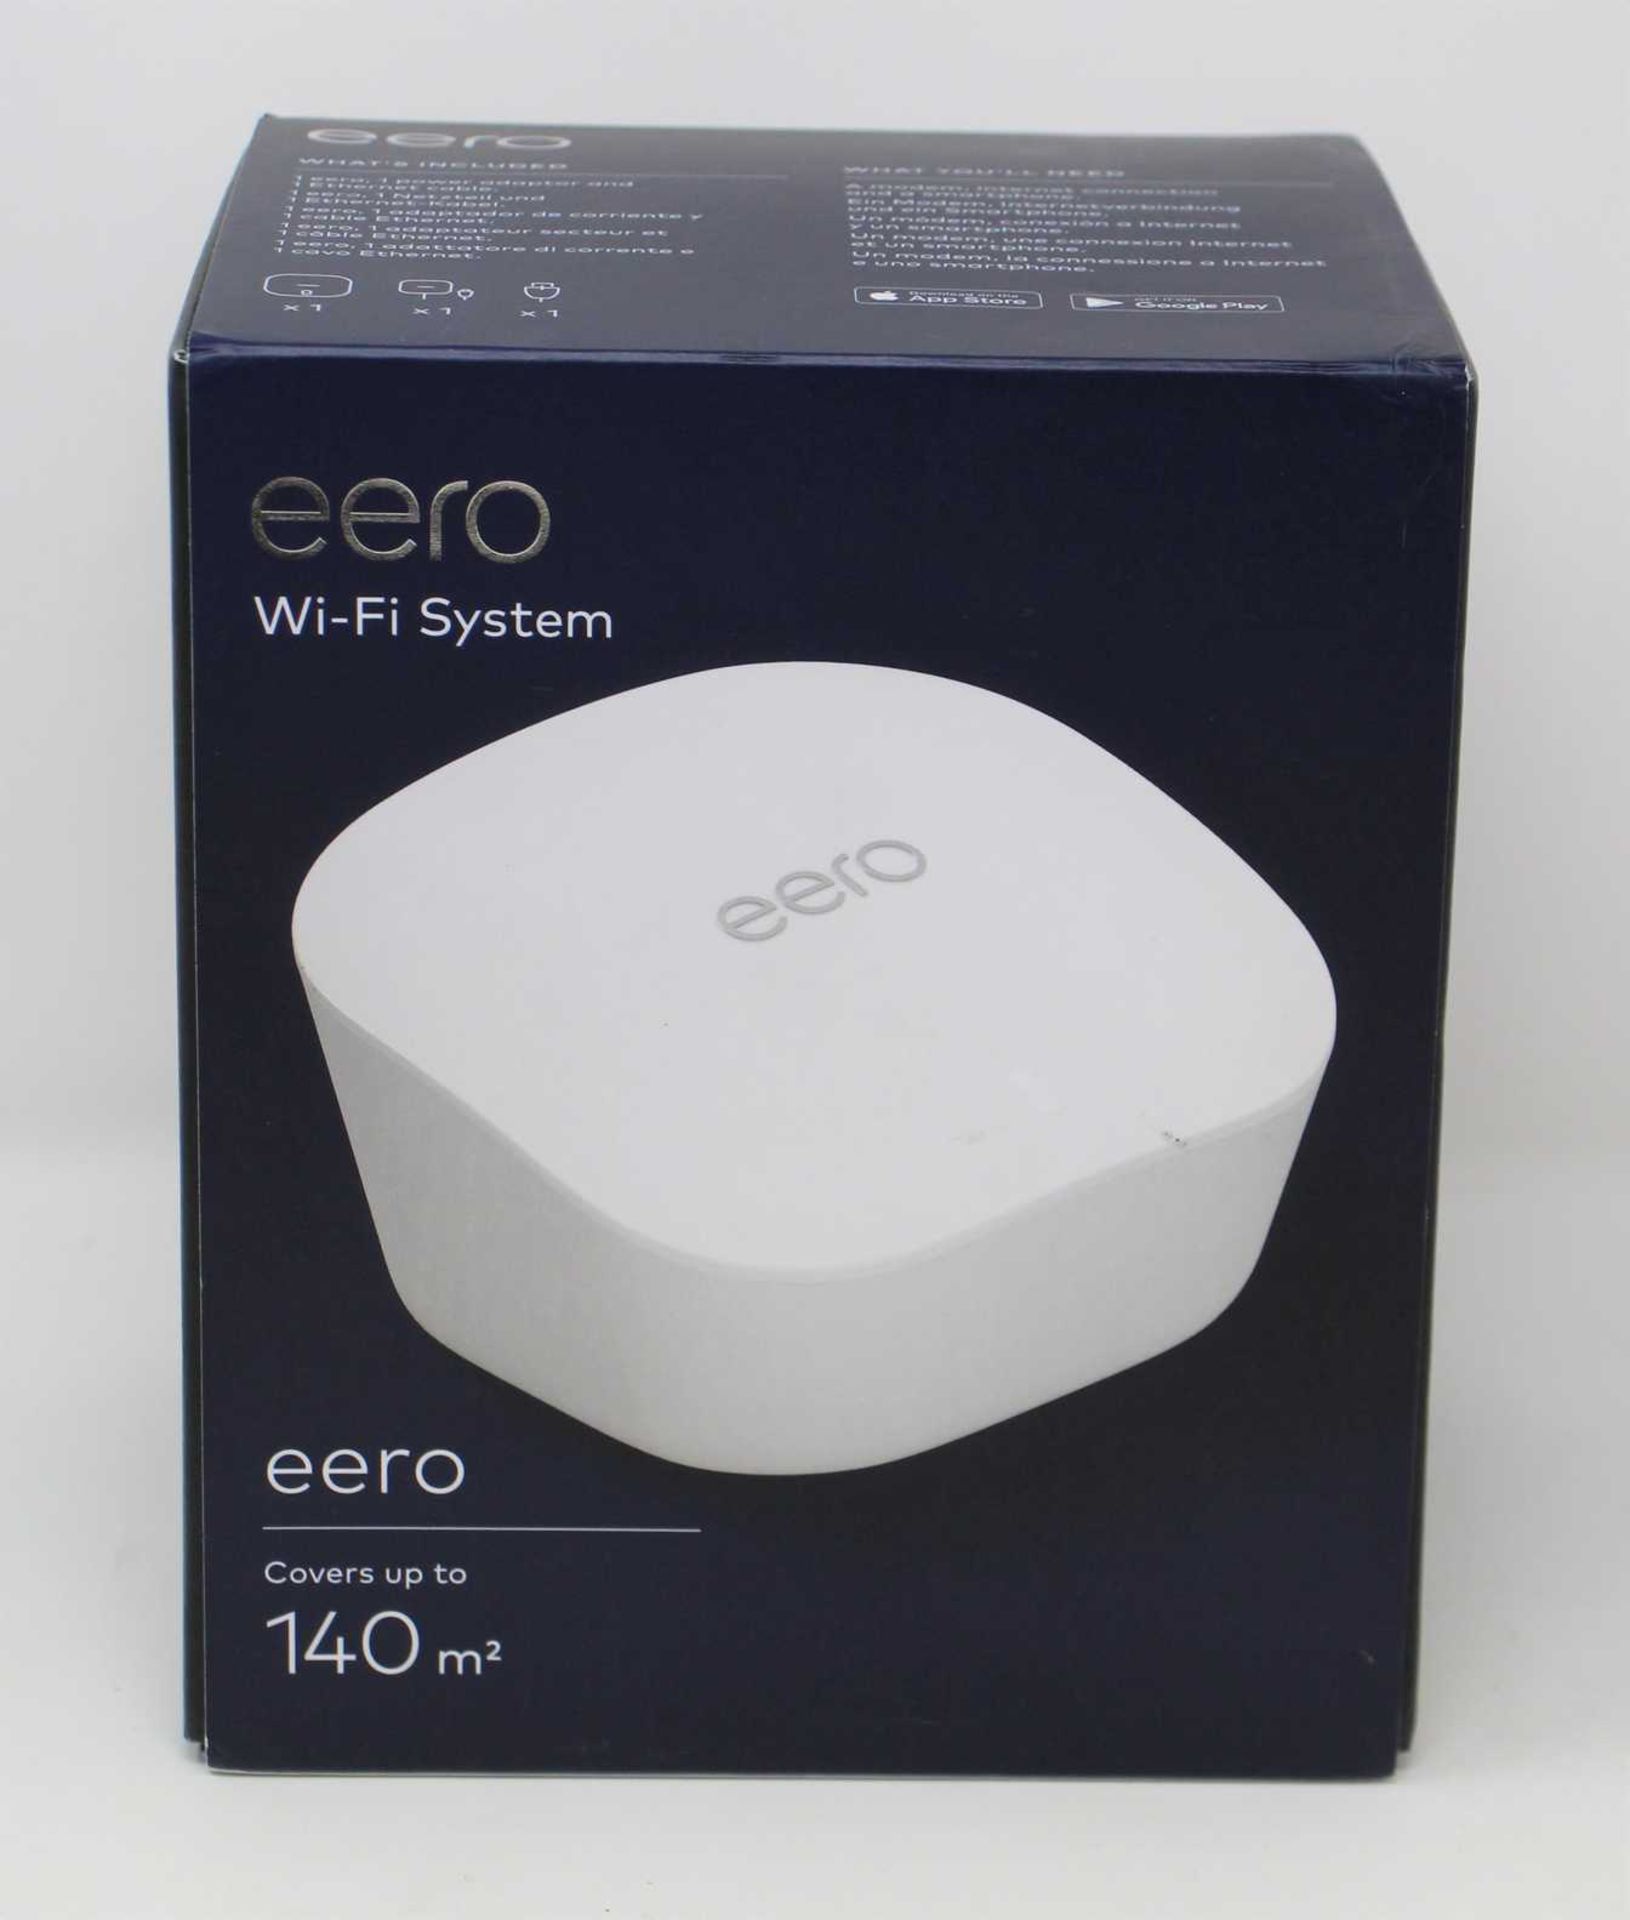 A boxed as new eero Mesh Wi-Fi Router (Model: J010114) (Box opened).